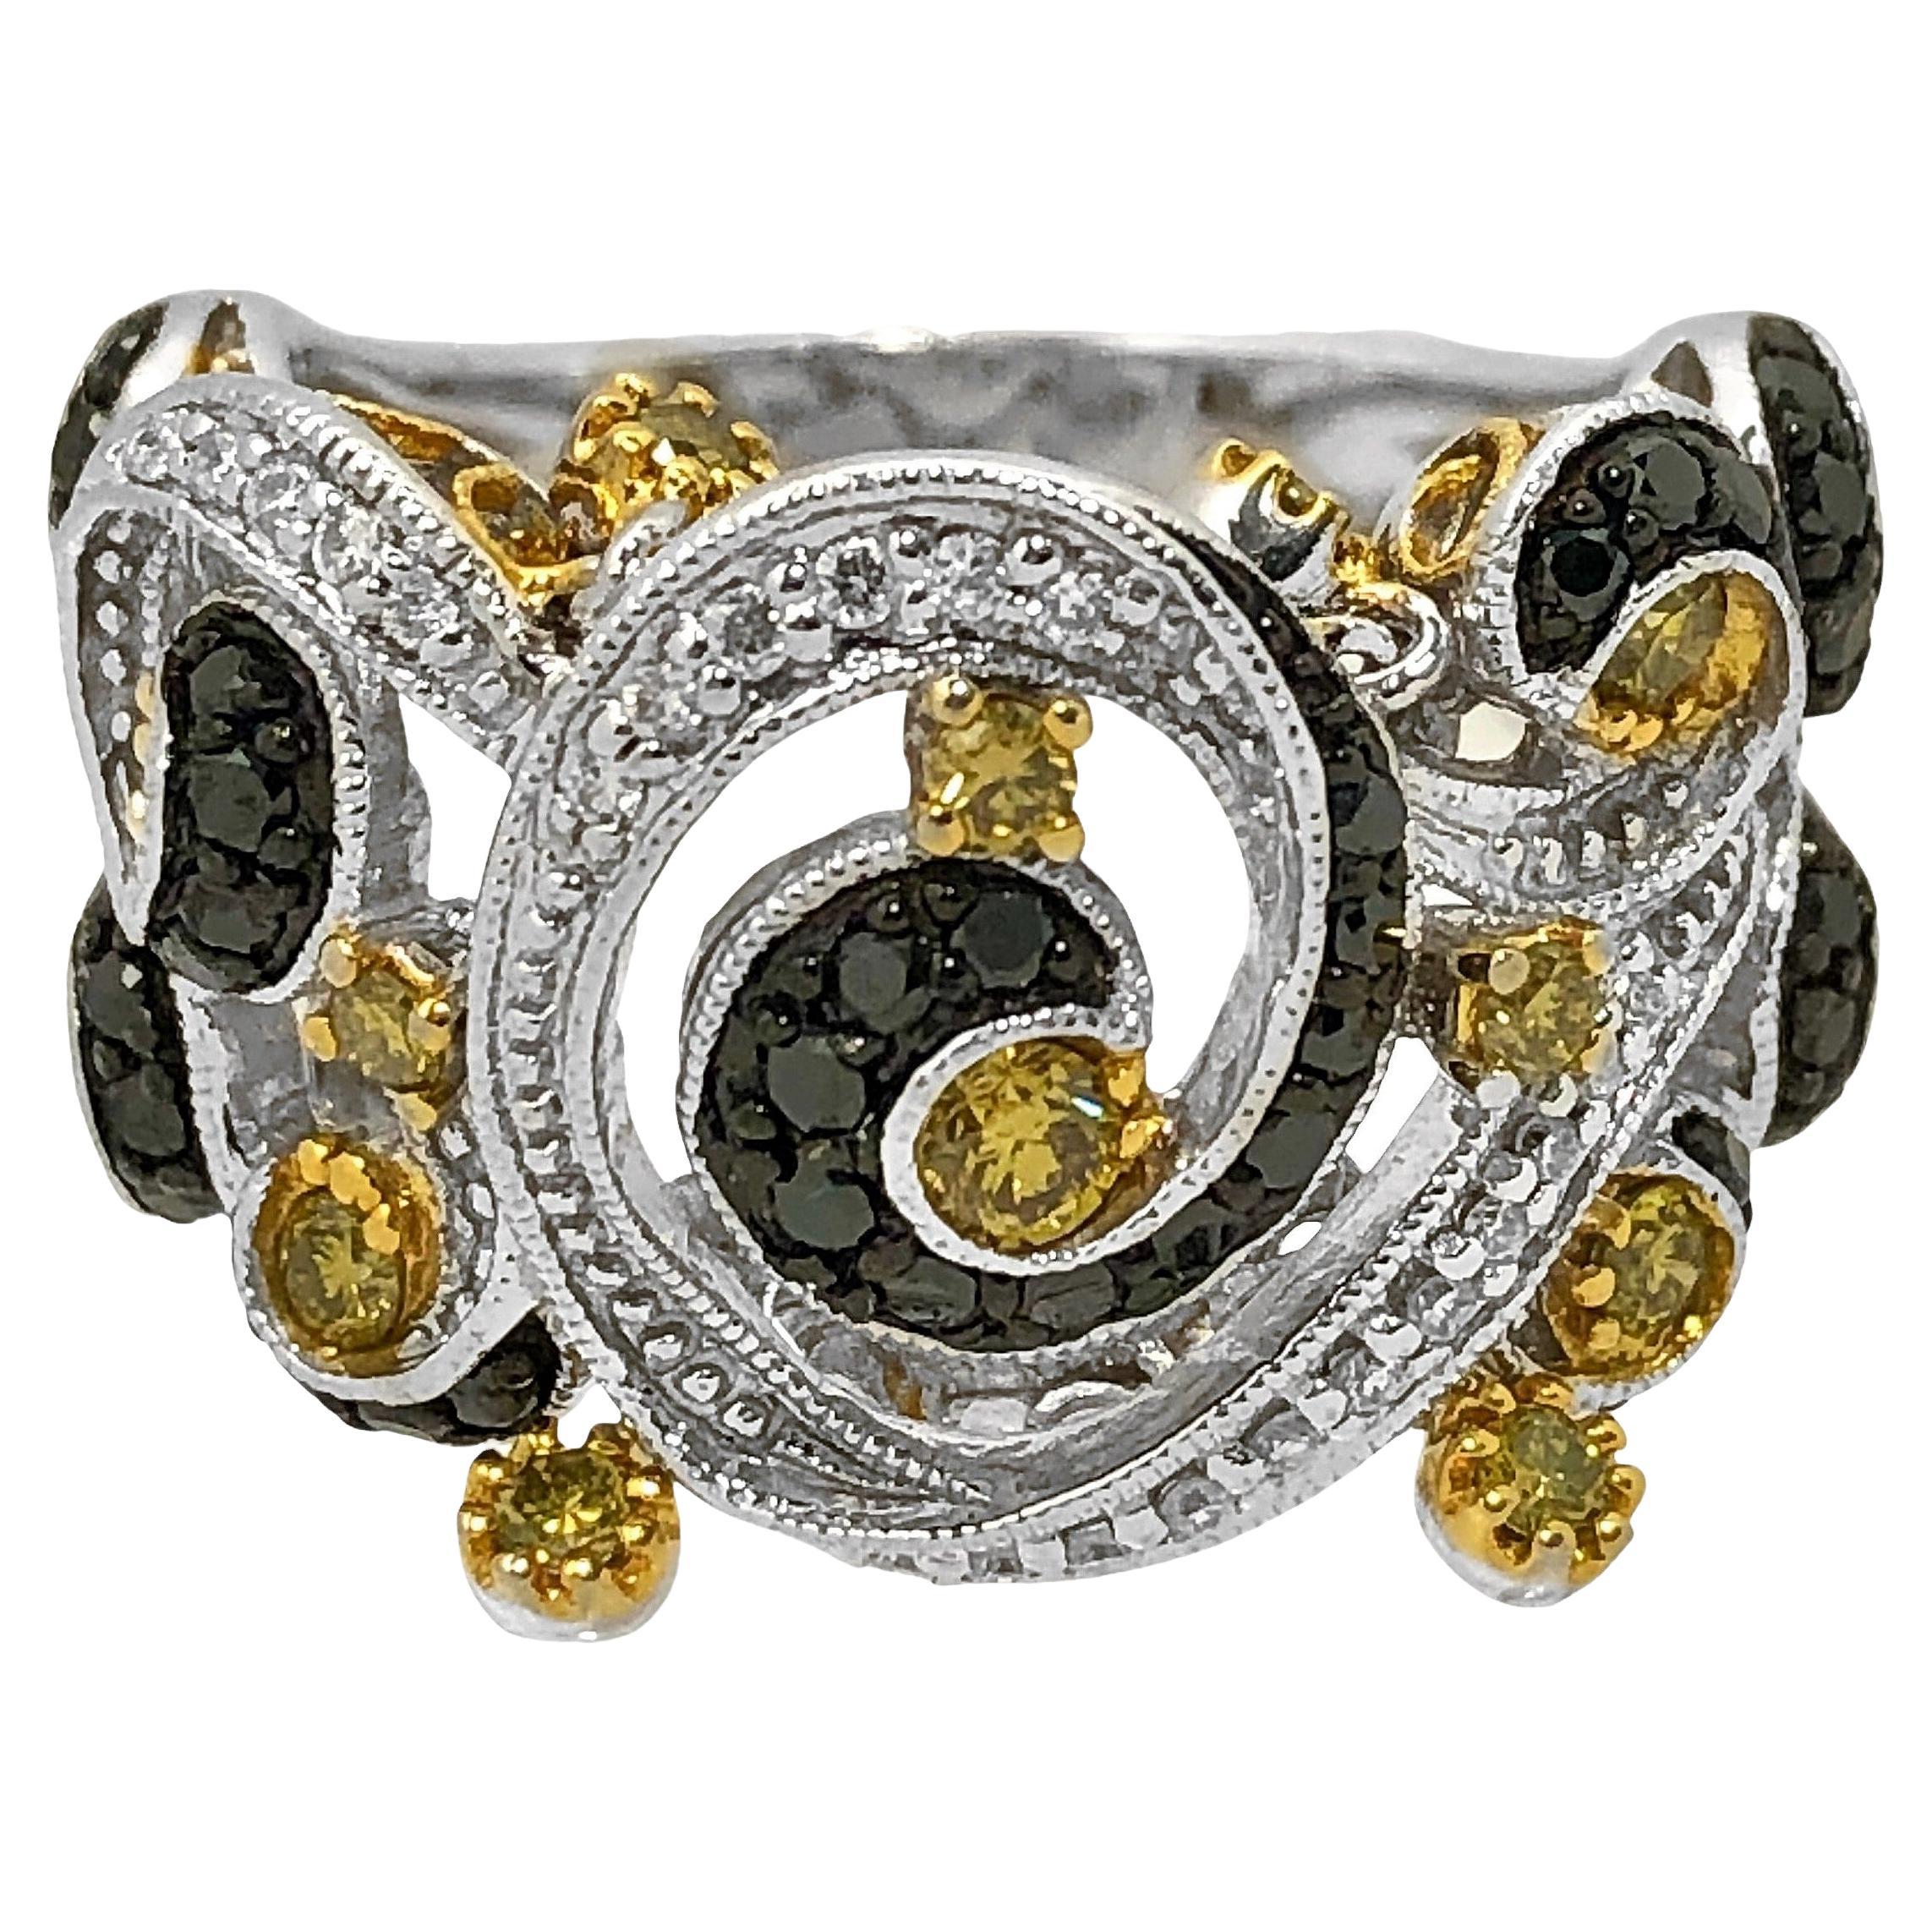 Brilliant Cut Modern 14K White Gold Ring with Fancy Yellow and Black Diamonds in Swirl Motif